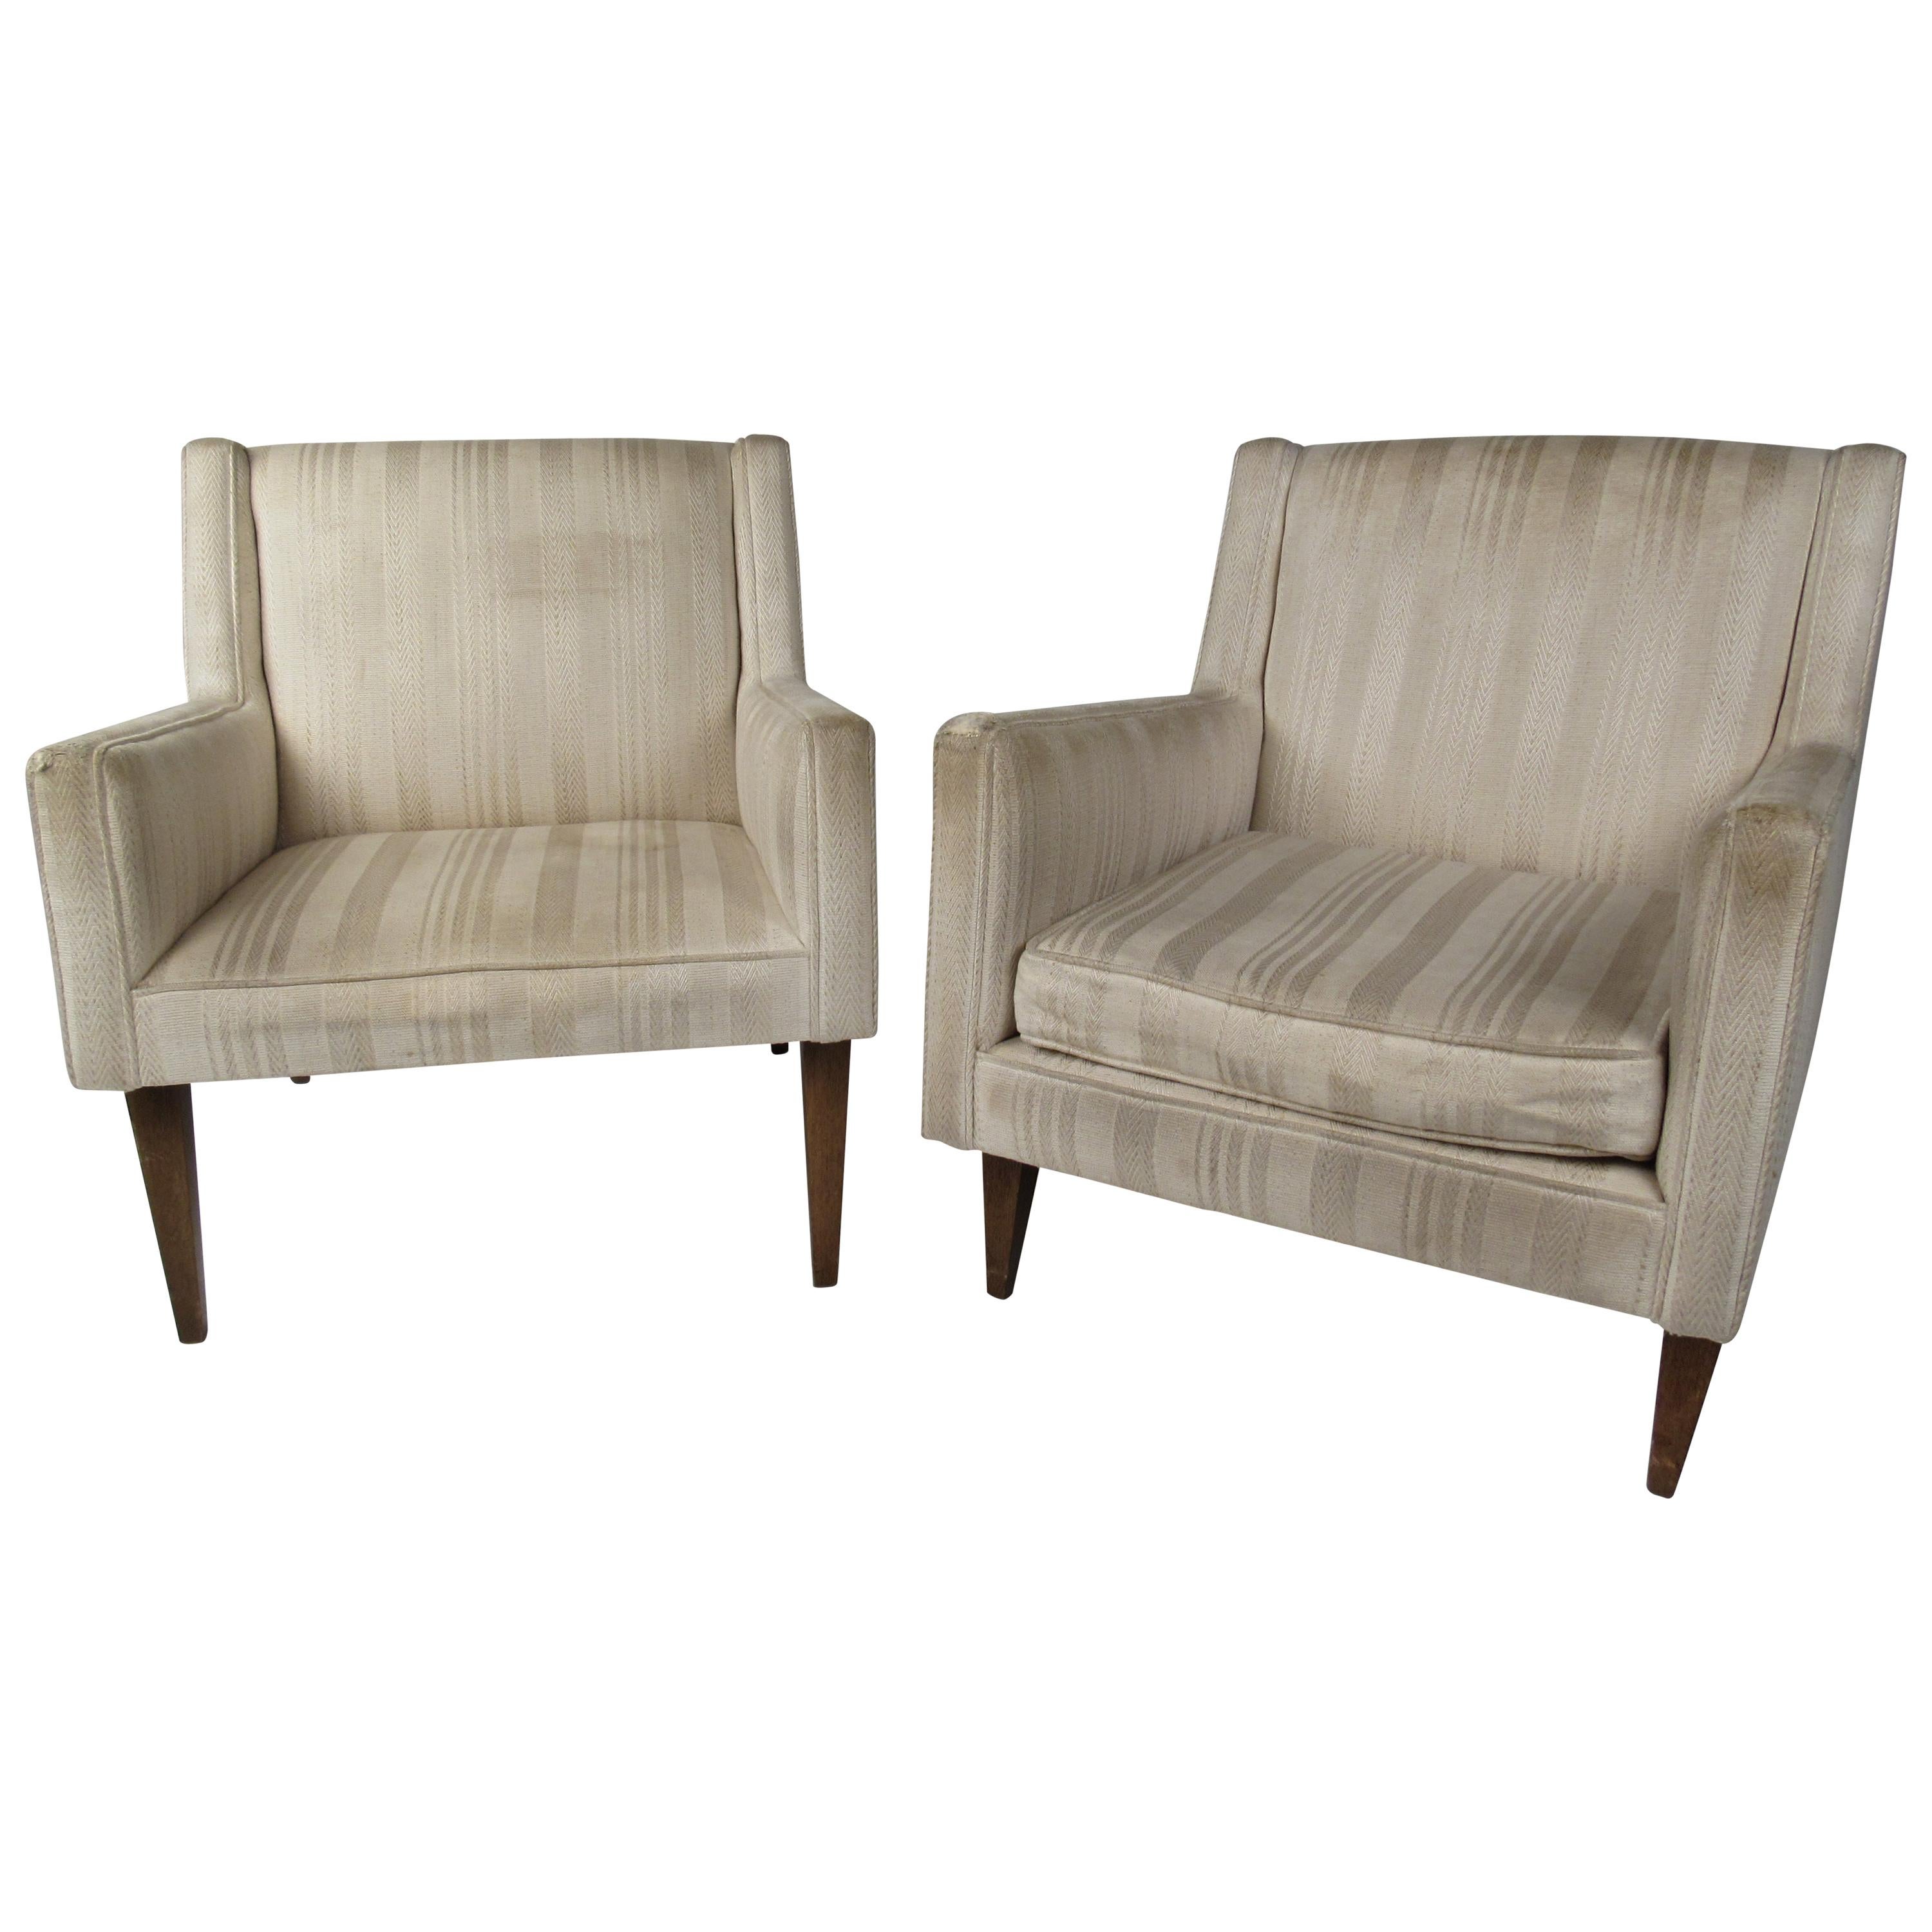 Pair of Mid-Century Modern His and Hers Lounge Chairs For Sale